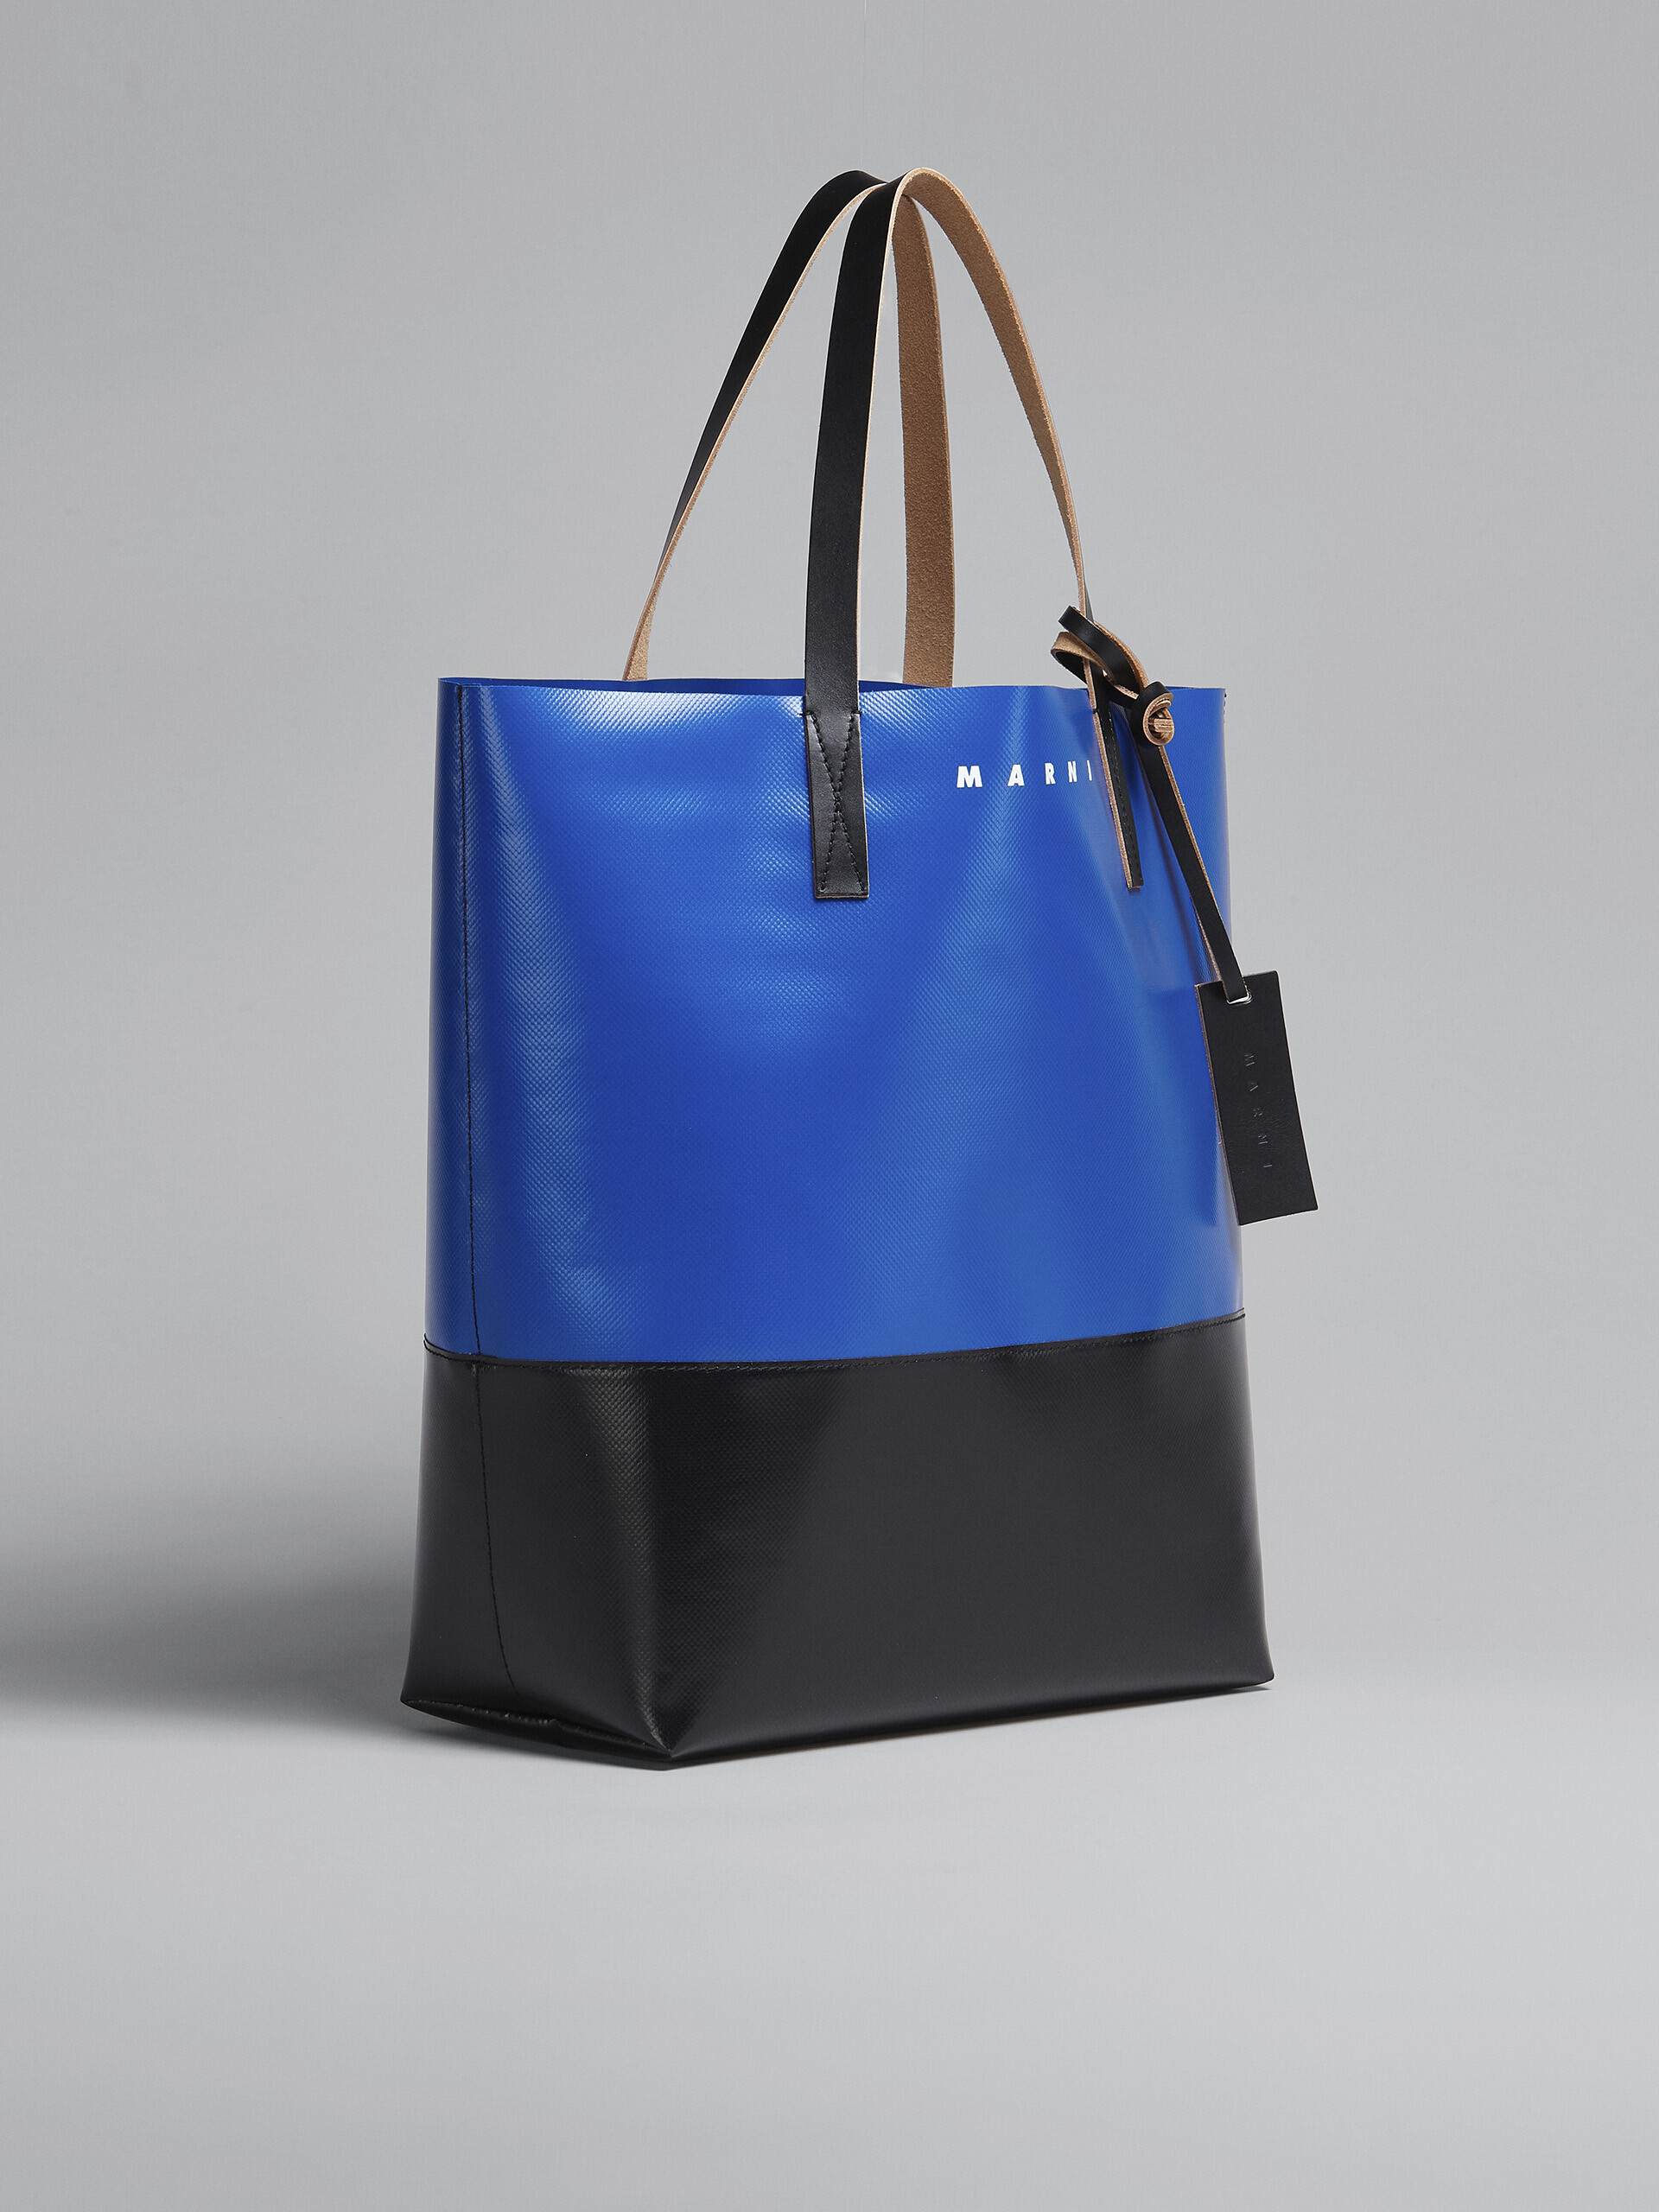 Tribeca shopping bag in blue and black - Shopping Bags - Image 6